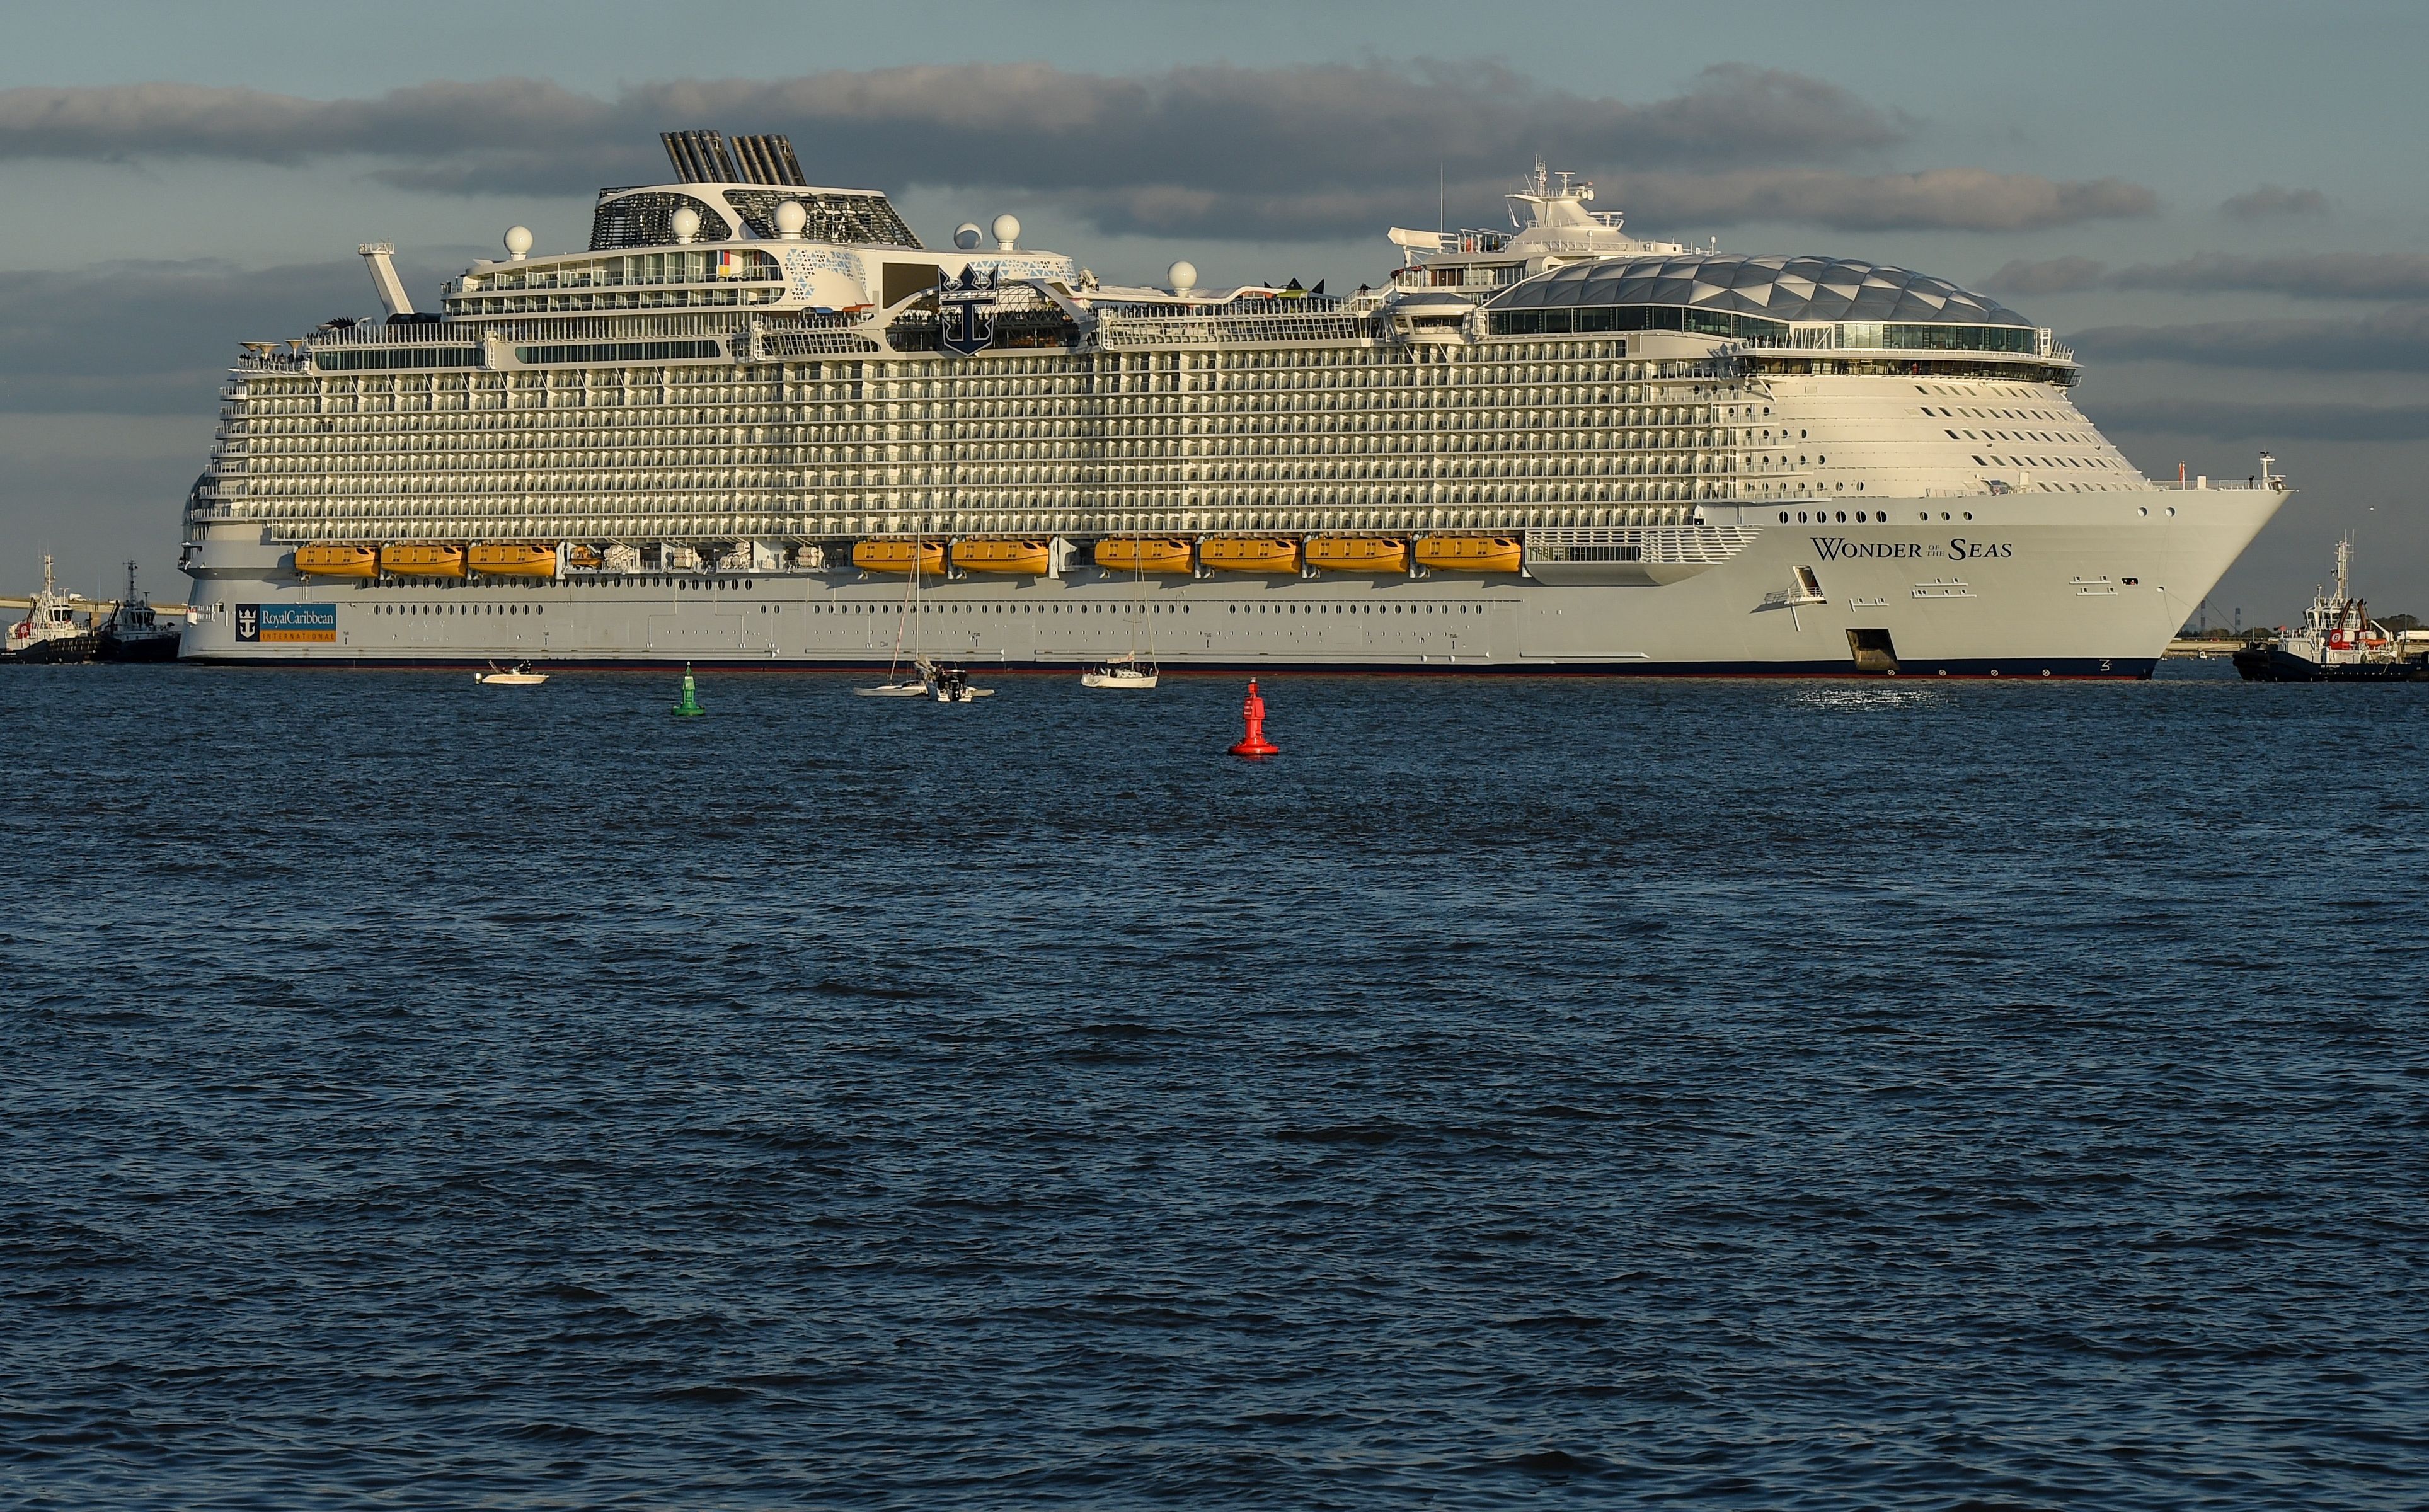 <p>The largest cruise ship, the <a href="https://www.royalcaribbean.com/cruise-ships/wonder-of-the-seas">Wonder of the Seas</a> owned by Royal Caribbean, measures a staggering 1,118 feet long (that’s longer than three football fields). It has space for 6,988 passengers, as well as 2,300 crew members. It features amenities including a surf simulator, mini golf, and a suite neighborhood structure.</p><b>Related: </b><a href="https://blog.cheapism.com/royal-caribbean-unveils-new-decked-out-cruise-ship-and-it-looks-unreal/">Royal Caribbean Unveils New Decked Out Cruise Ship — and It Looks Unreal</a>